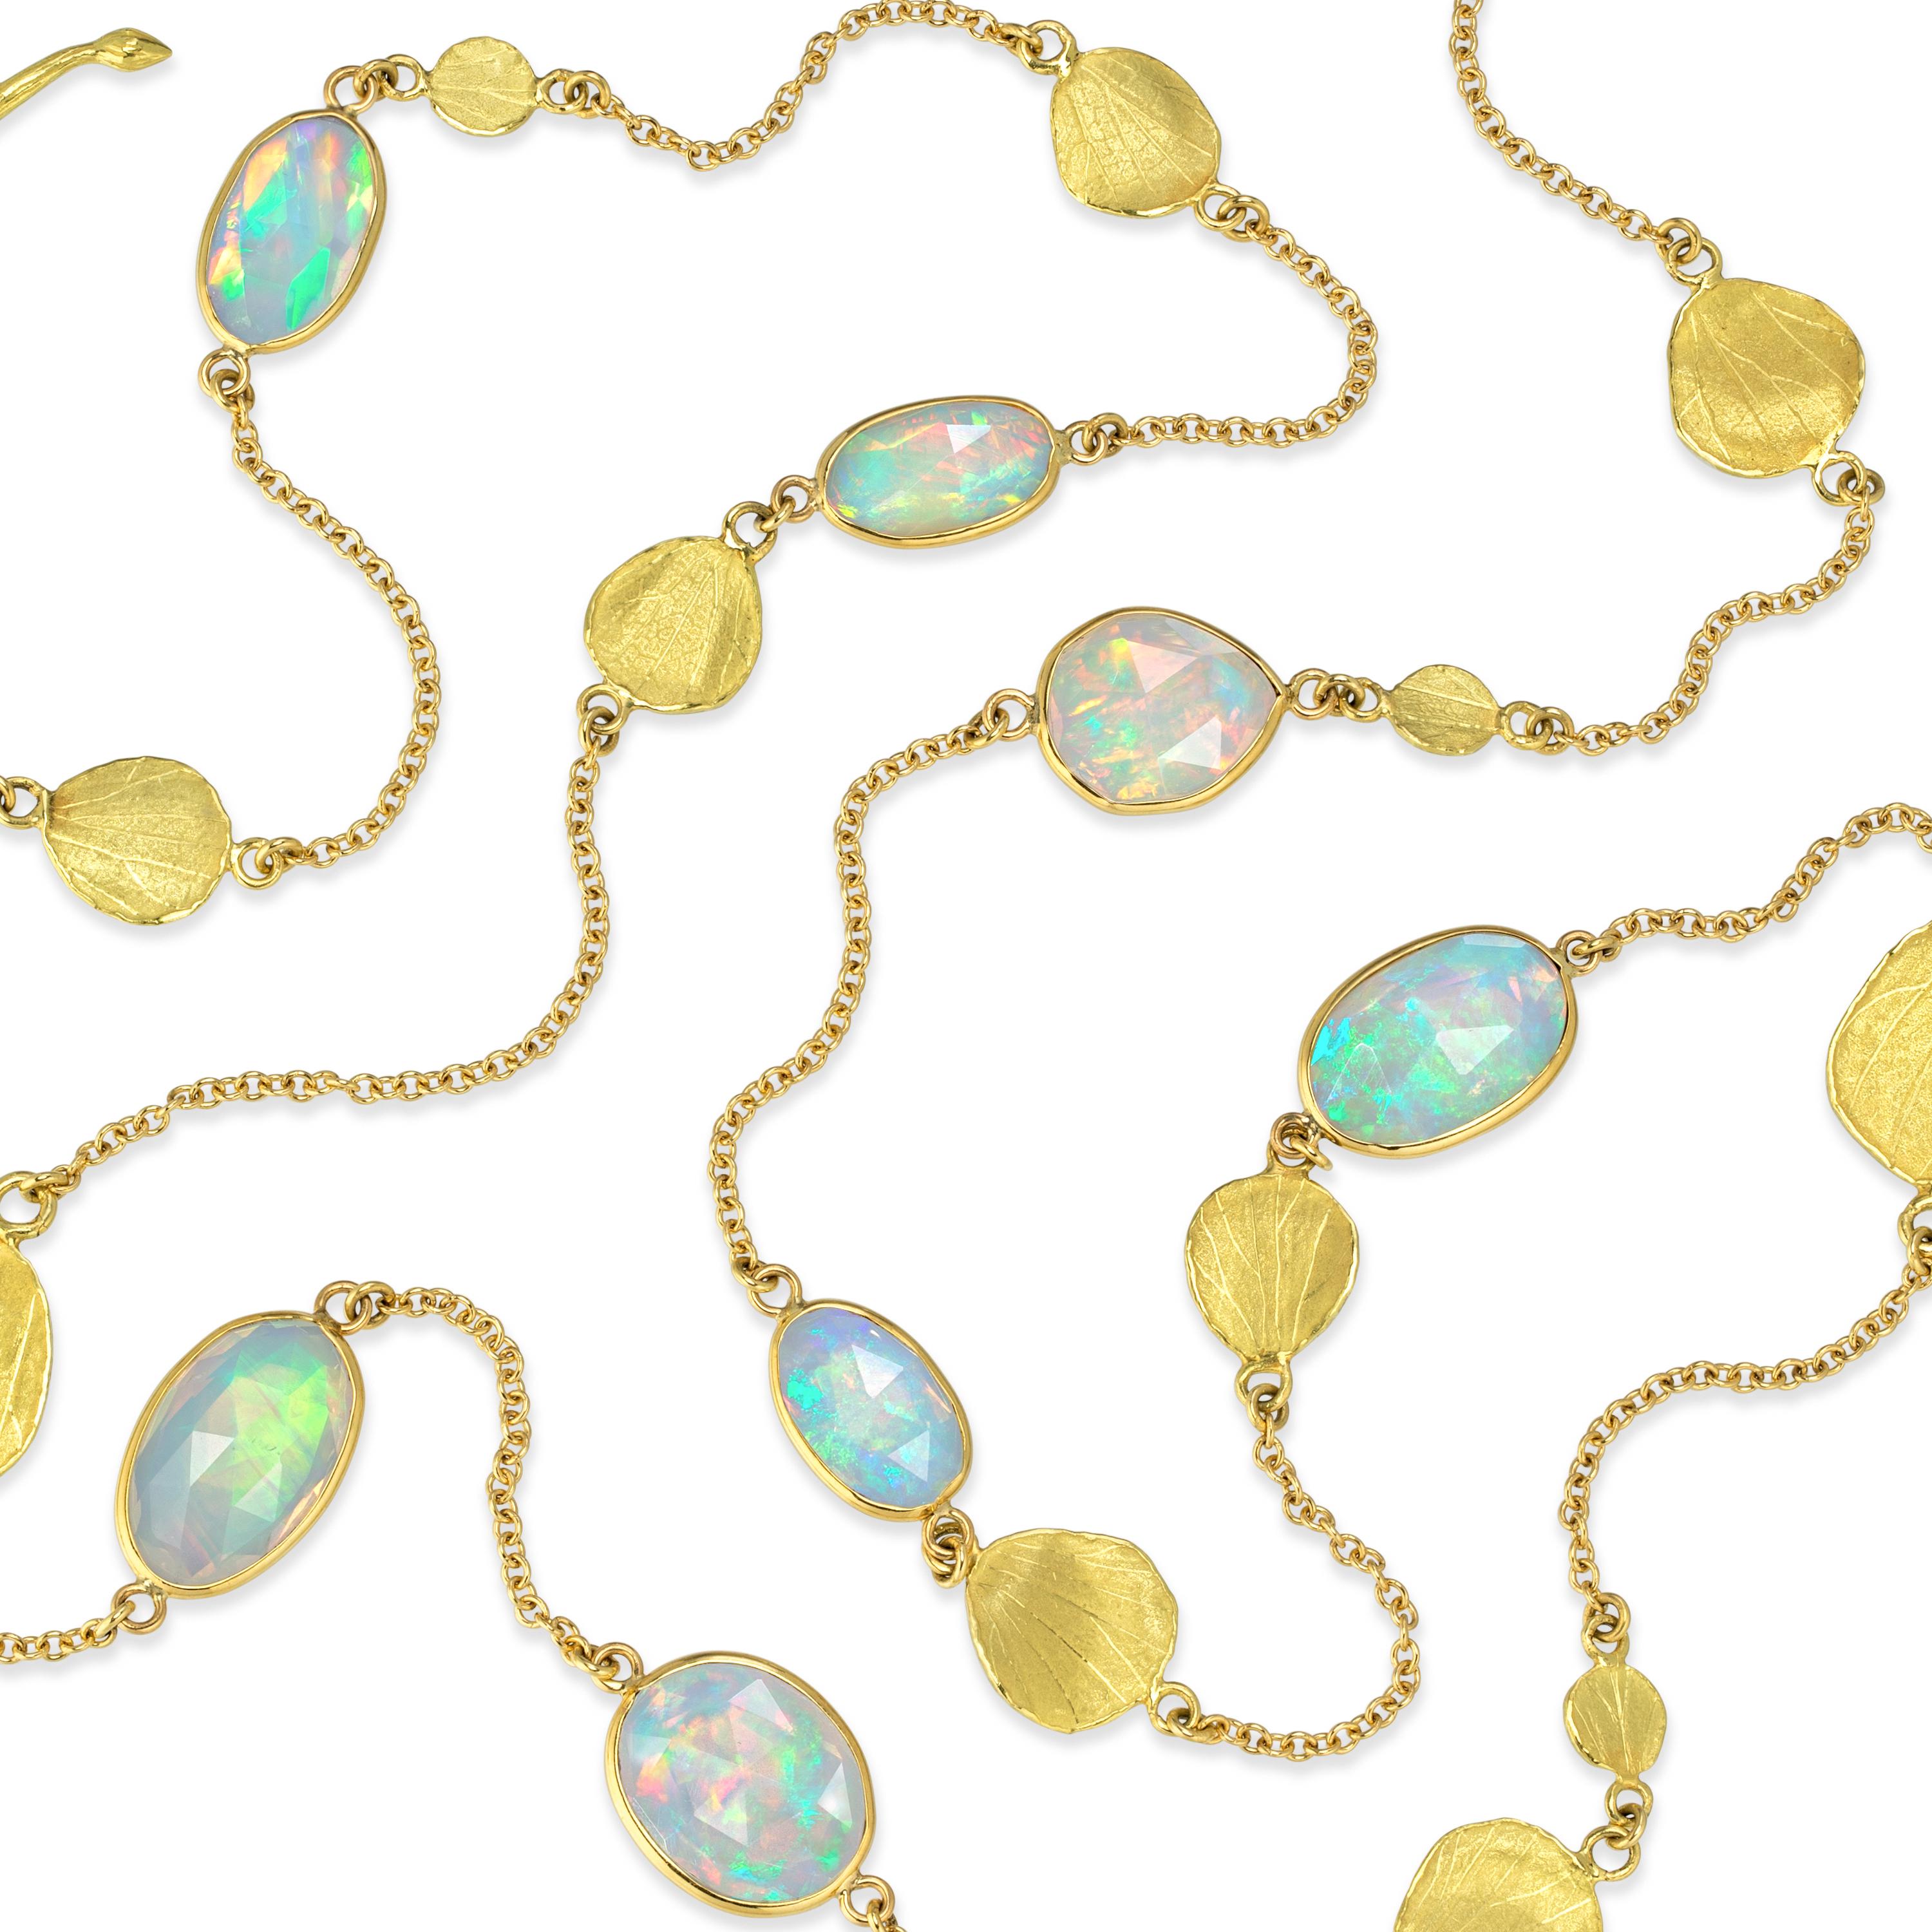 Long Petals Necklace handcrafted by award-winning jewelry artist Barbara Heinrich in matte-finished 18k yellow gold featuring eight faceted rose-cut Ethiopian opals totaling 16.58 carats, bezel-set and accented by 18k yellow gold petal spacers and